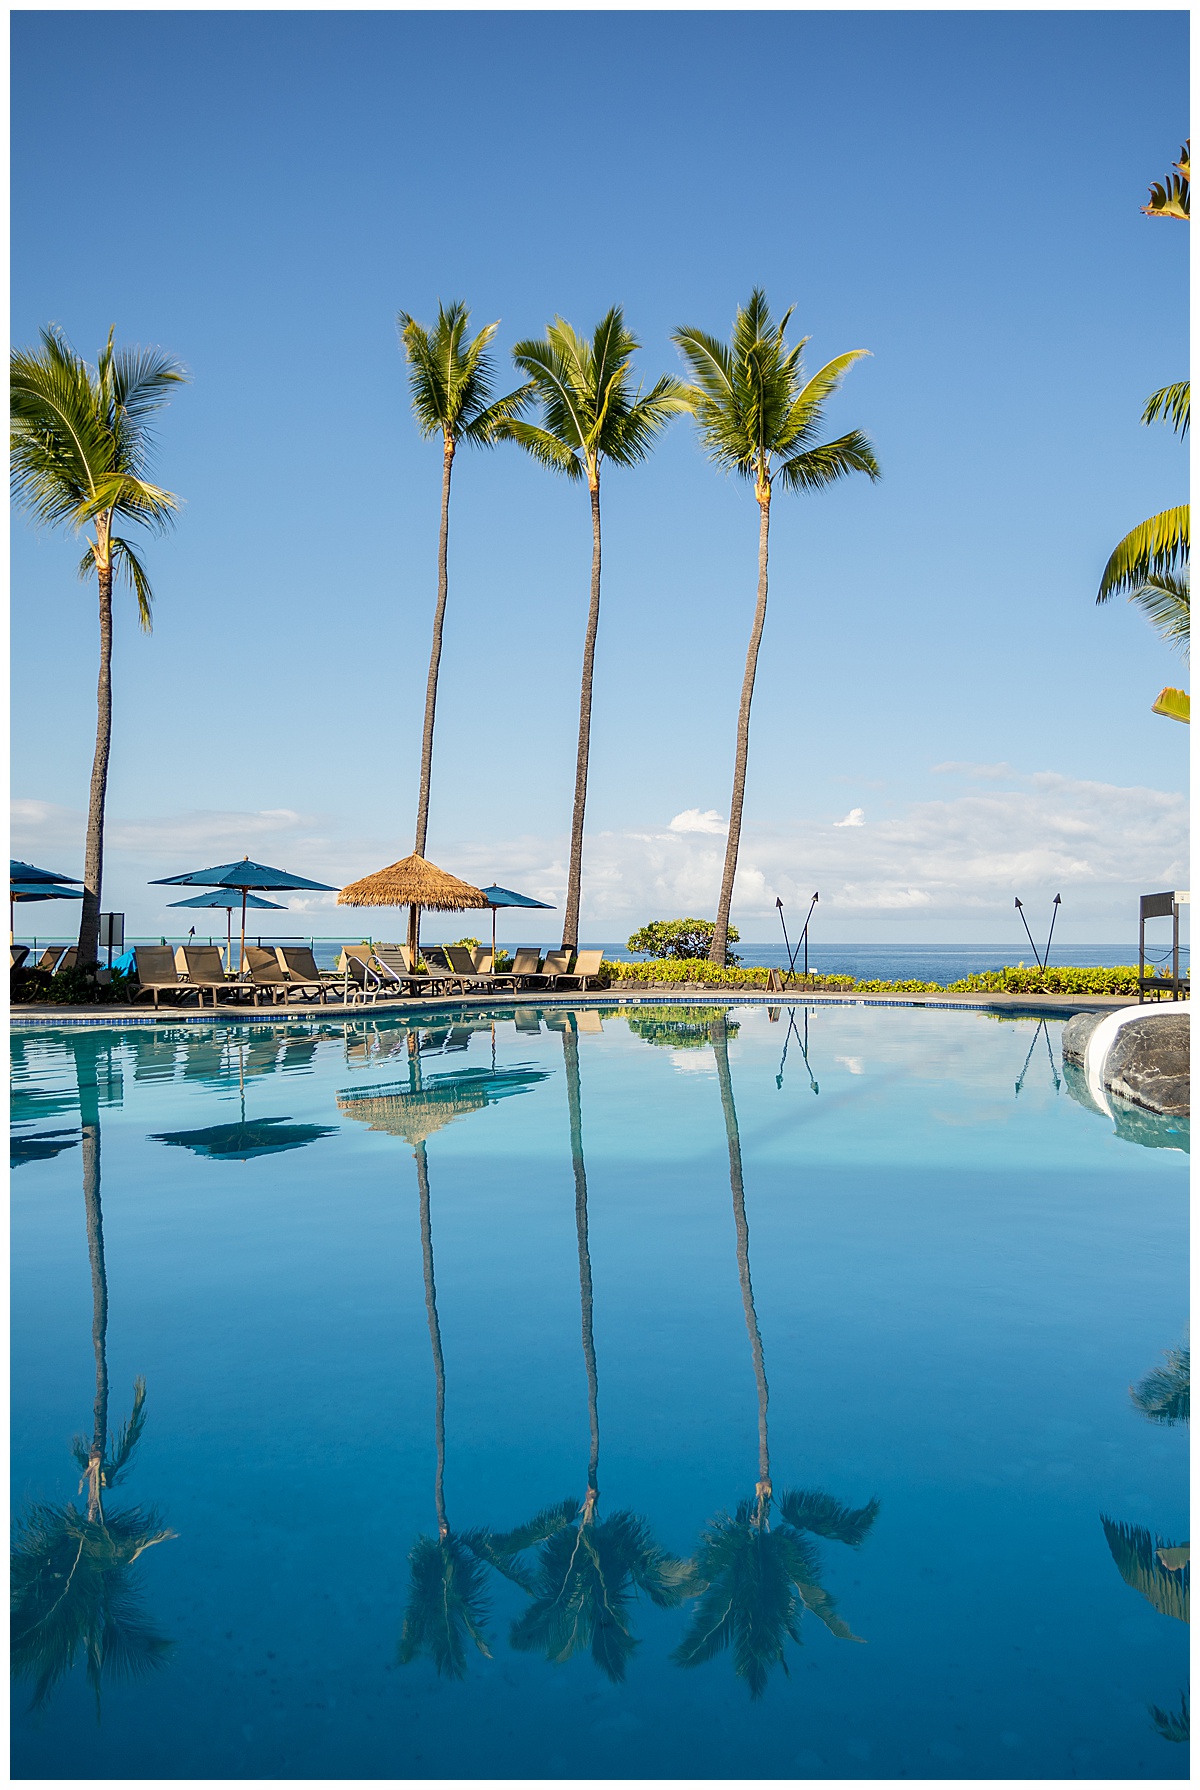 The larger of the two pools at the Outrigger Kona Resort. This pool is surrounded by palm trees and is oceanfront.